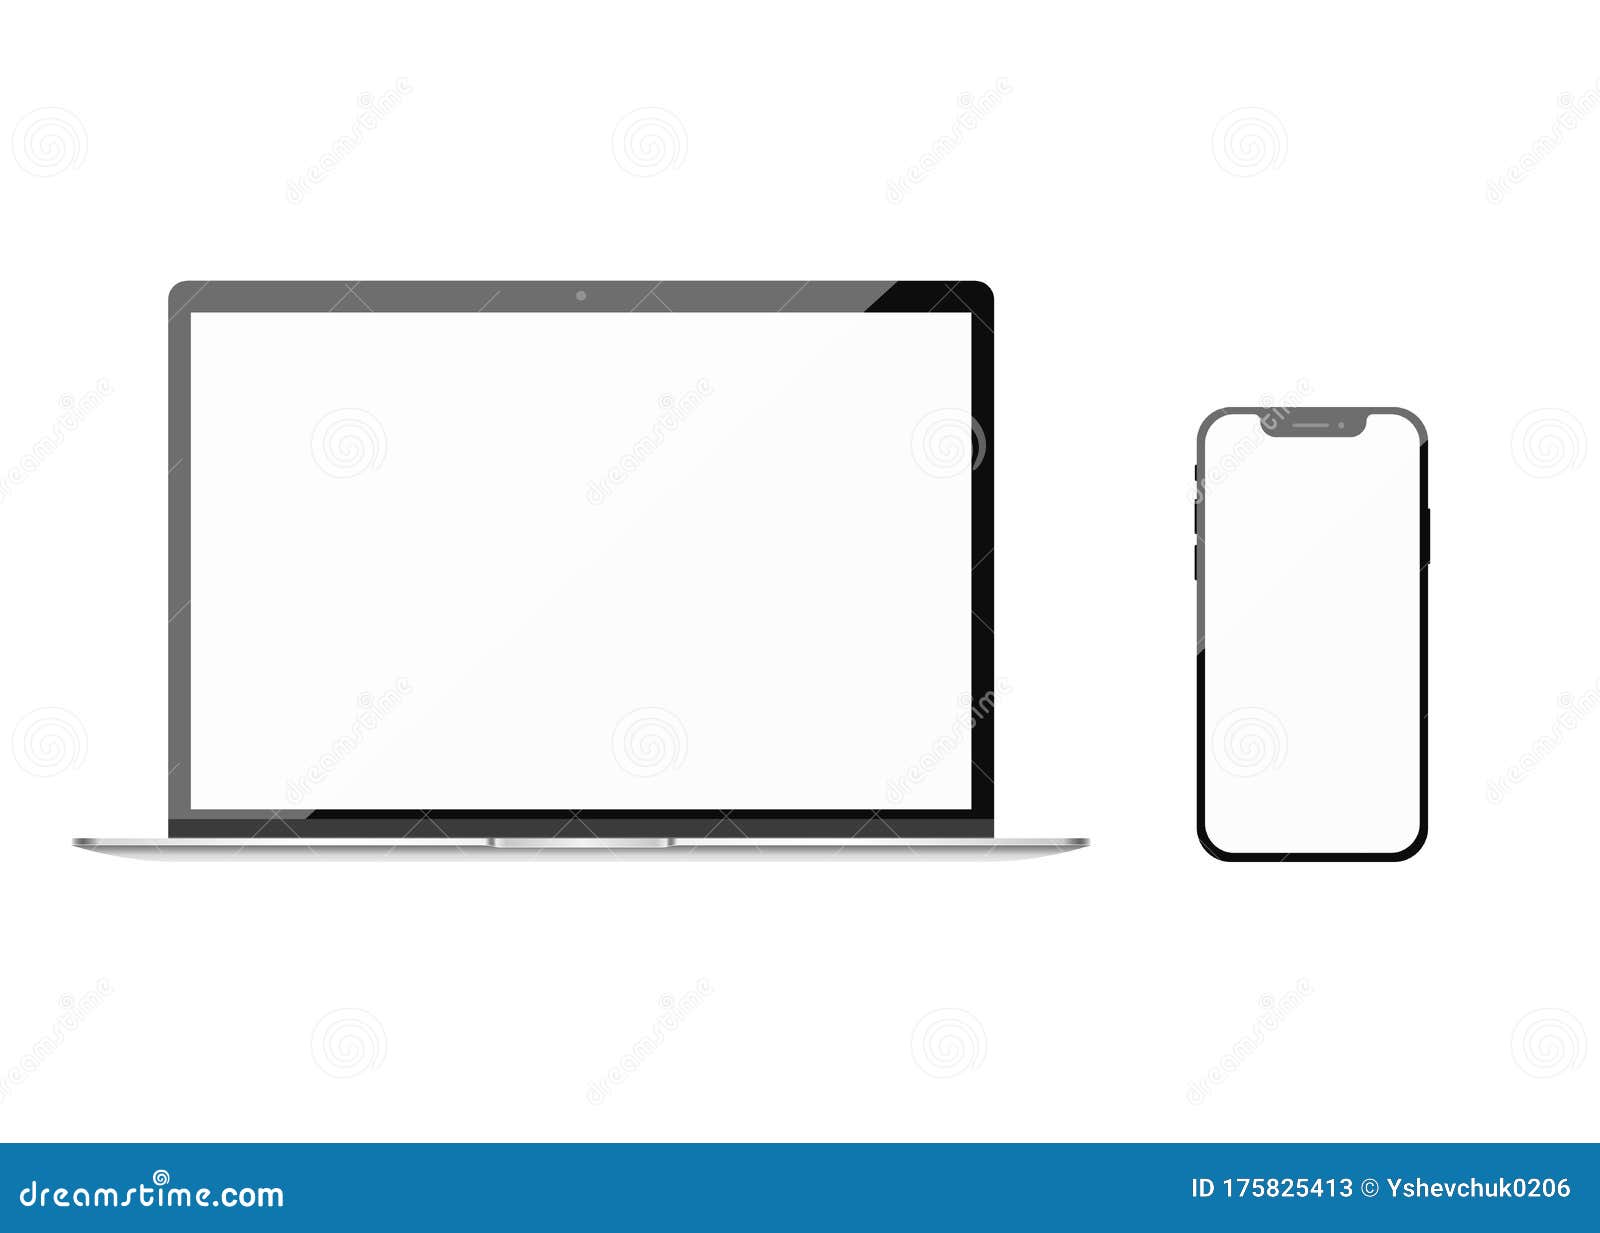 apple macbook and iphone. realistic modern monitor, computer, laptop, smart phone. device mockup. electronics industry. 